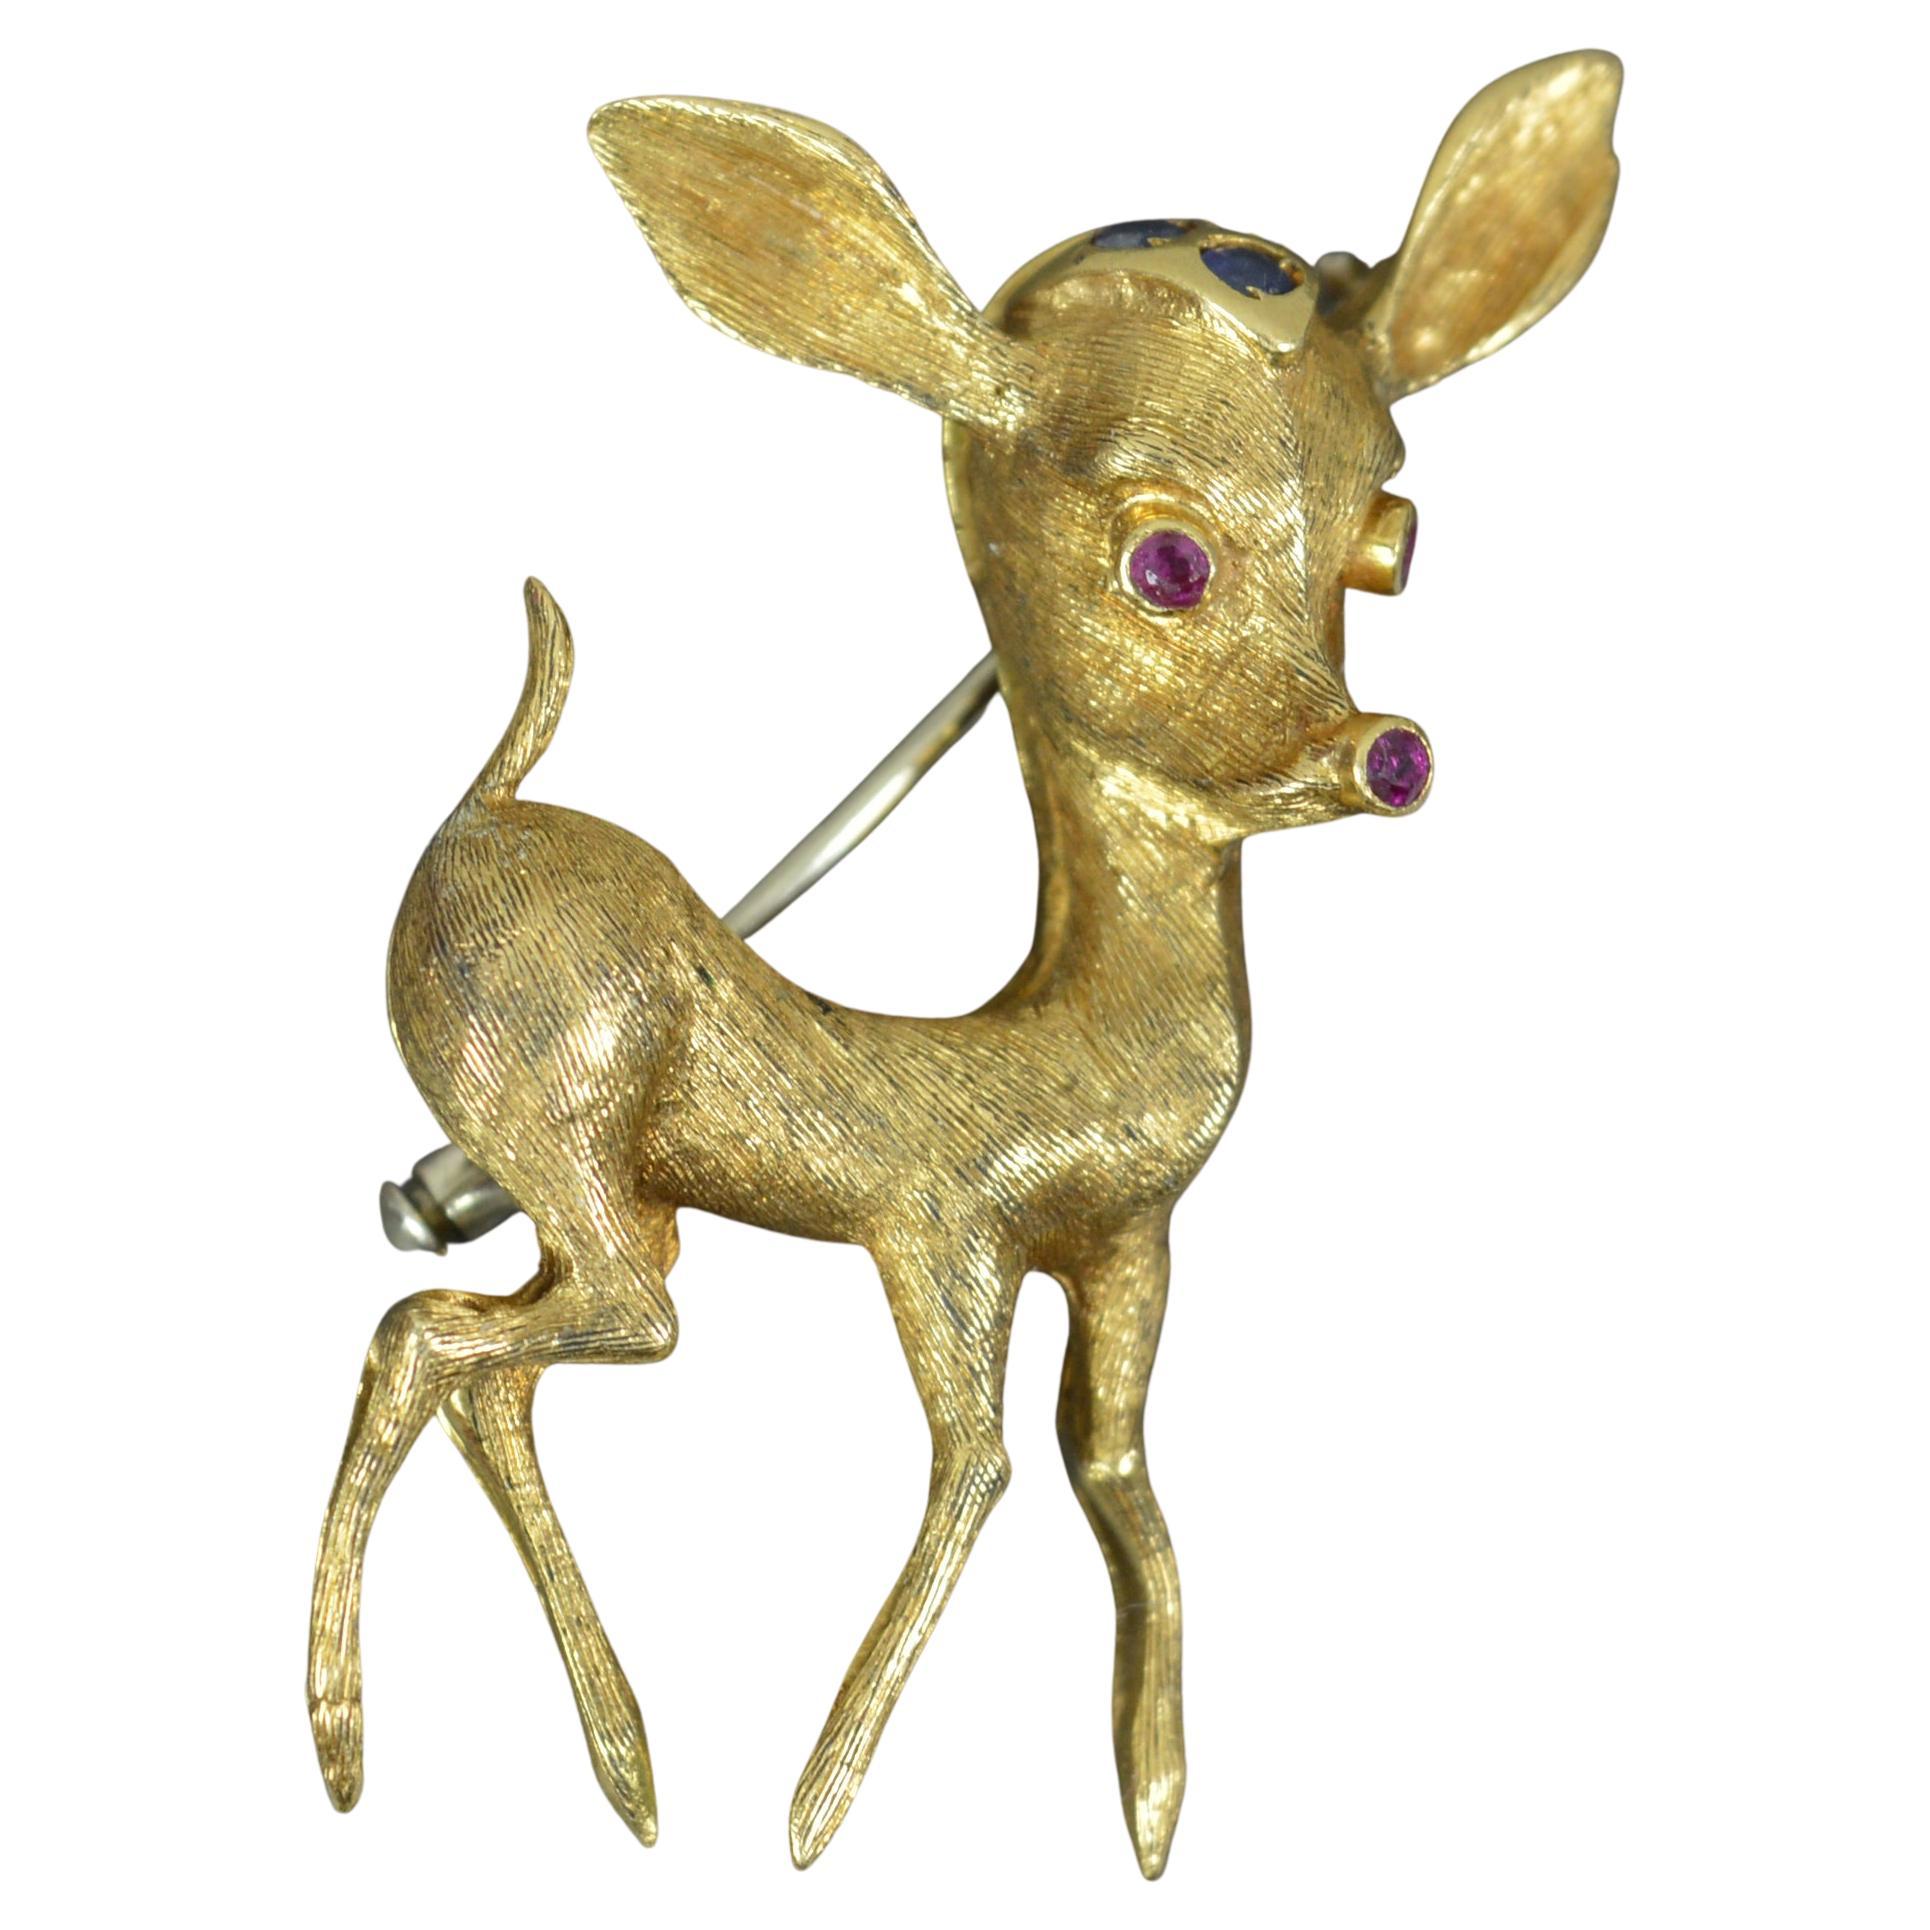 Impressive 18 Carat Gold Ruby and Sapphire Bambi Deer Brooch